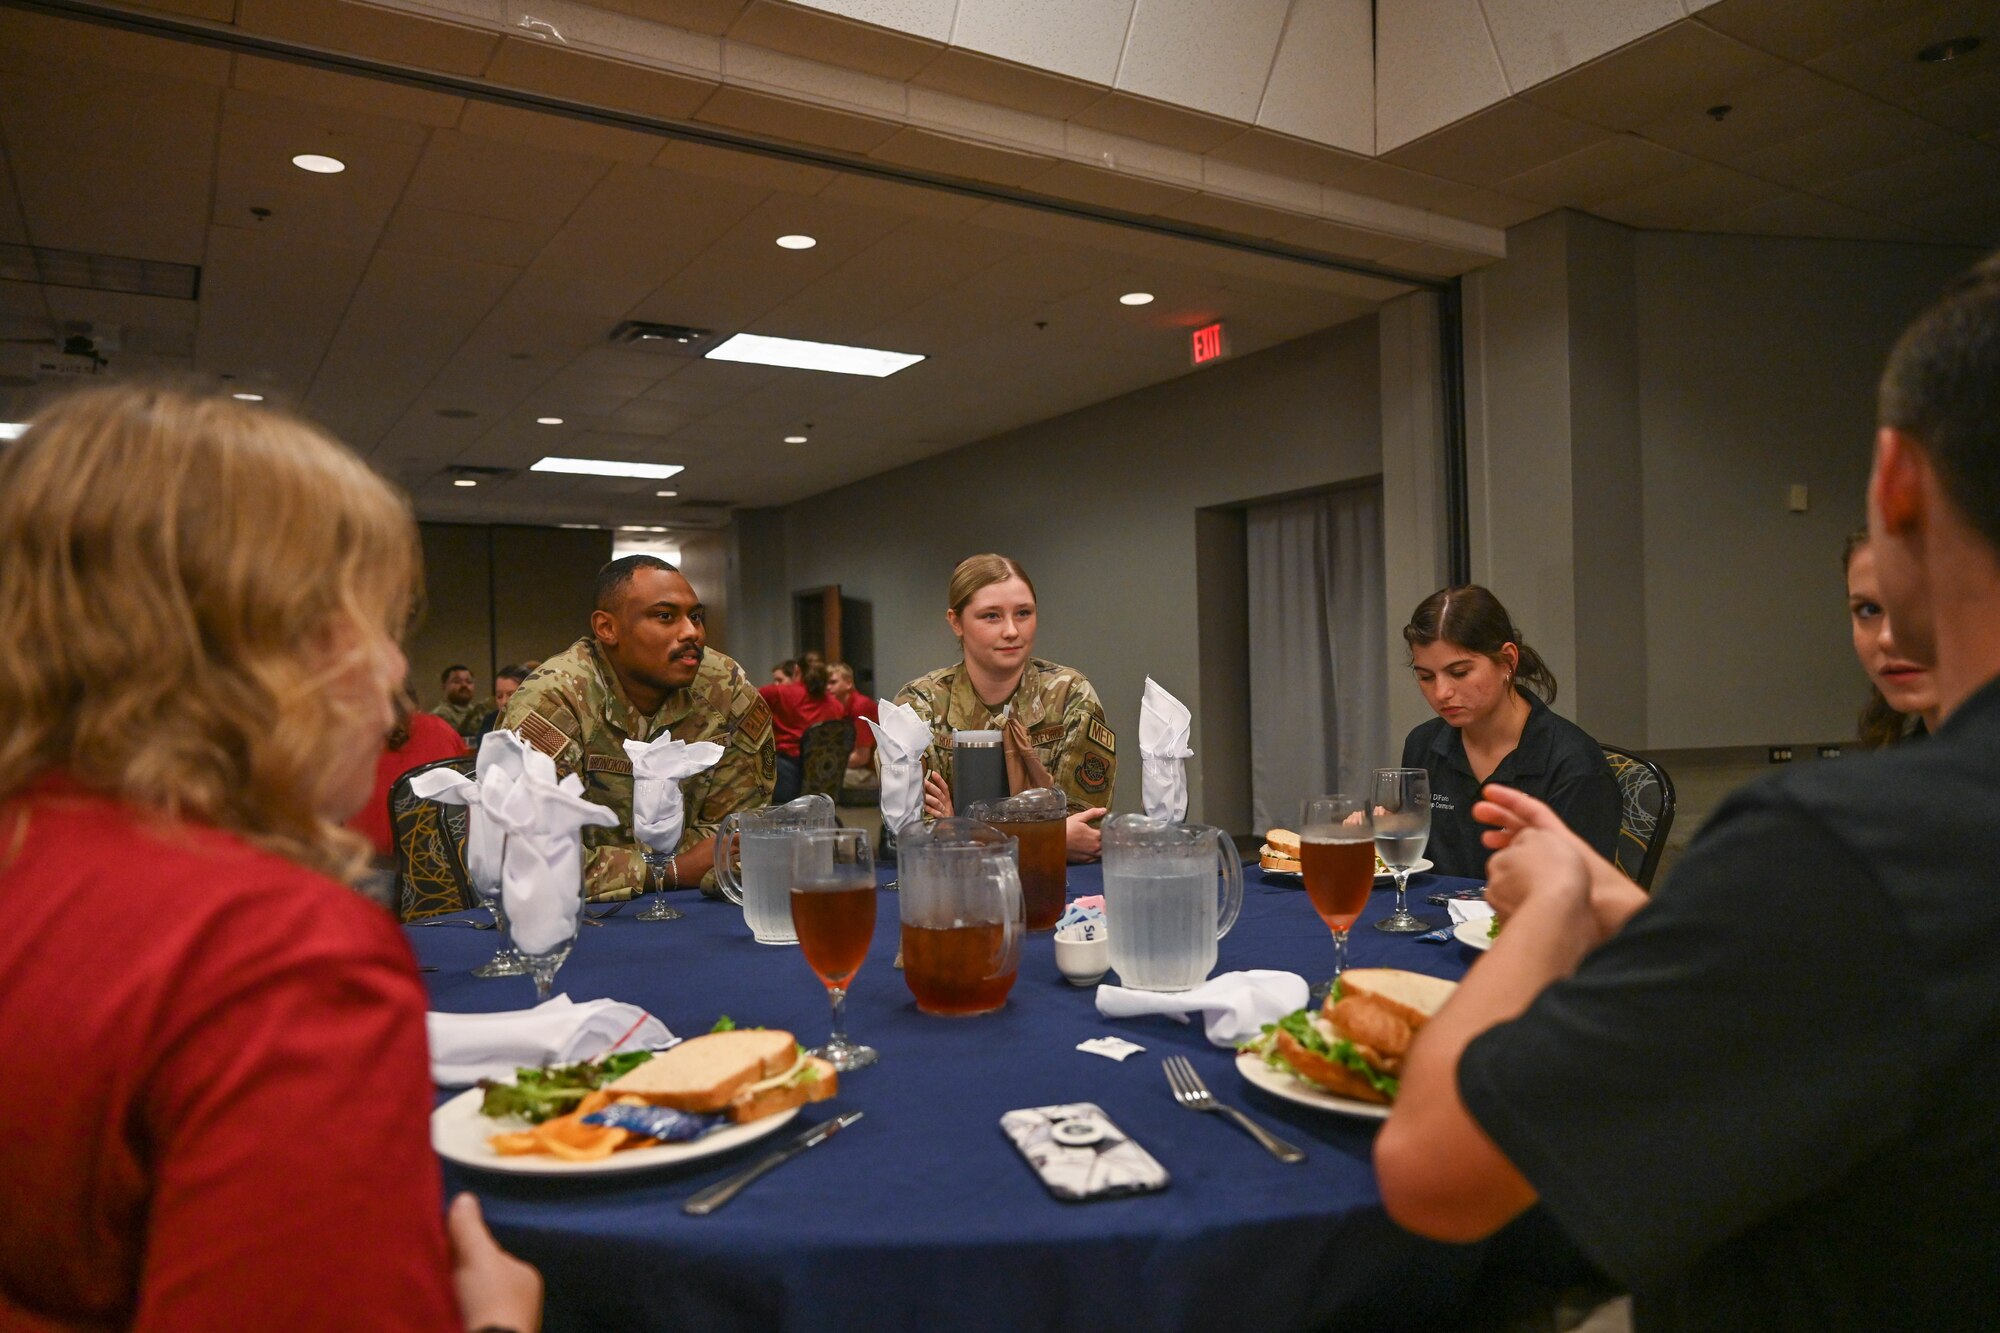 People in uniform share a meal with high school students